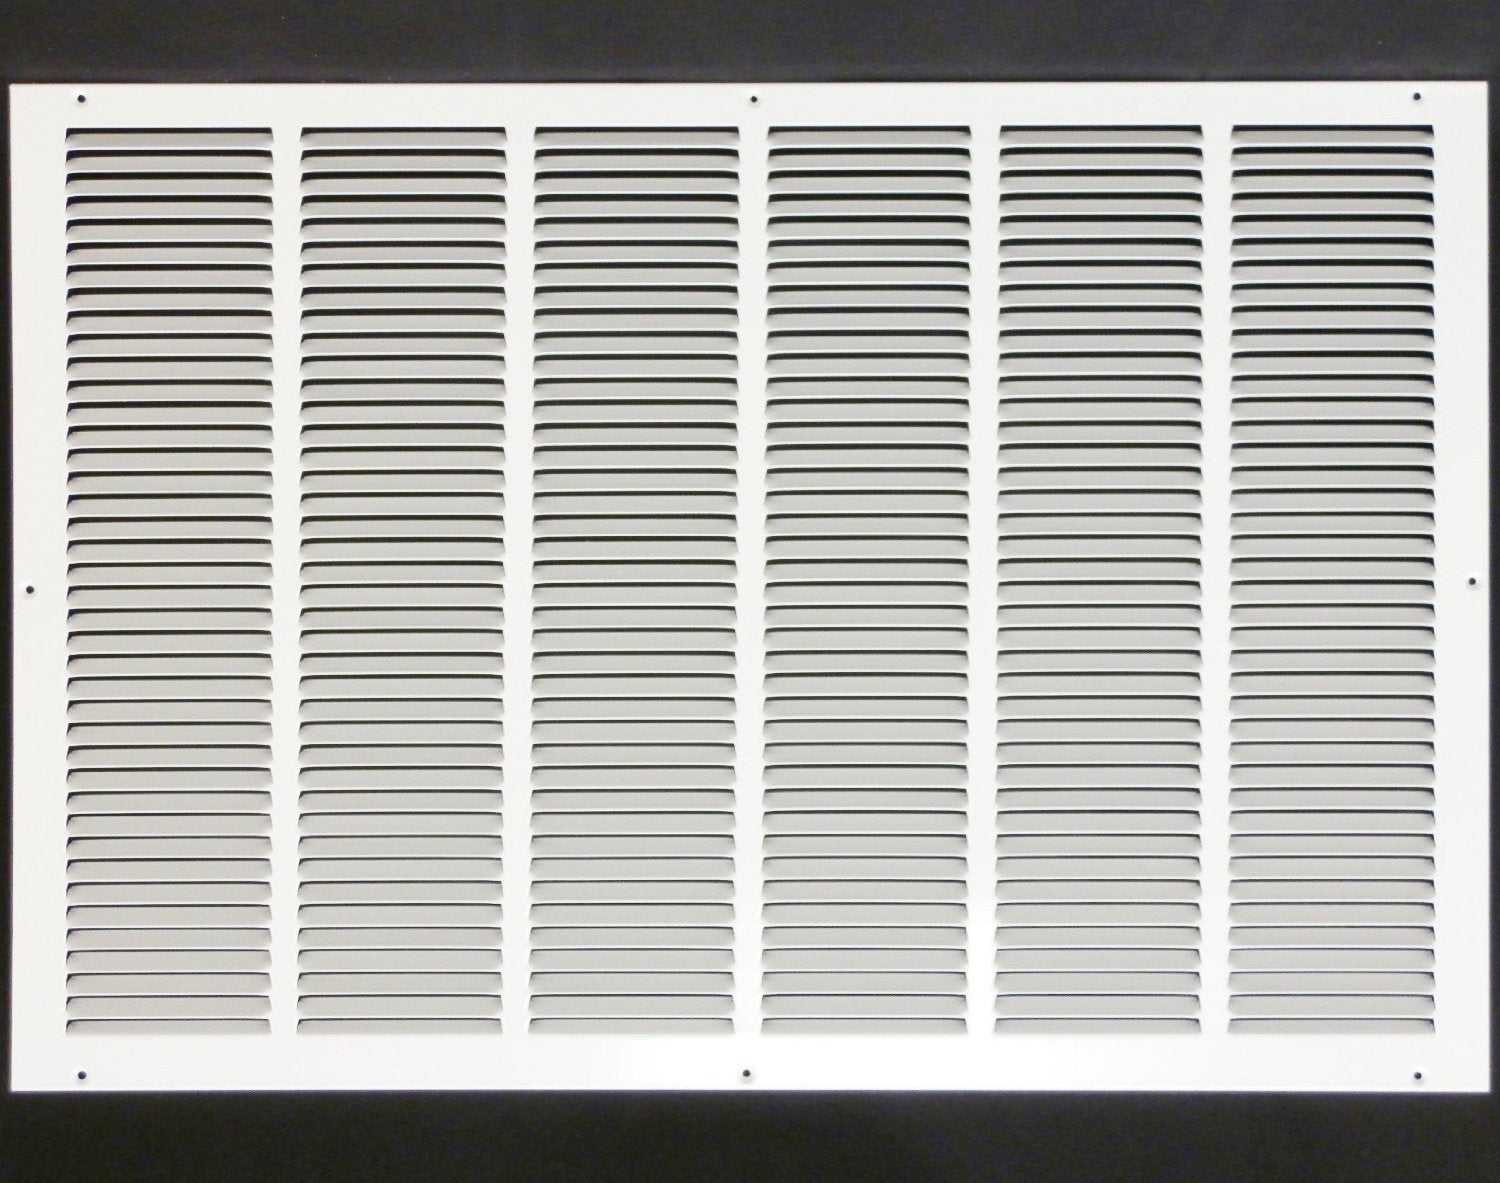 30" X 24" Air Vent Return Grilles - Sidewall and Ceiling - Steel